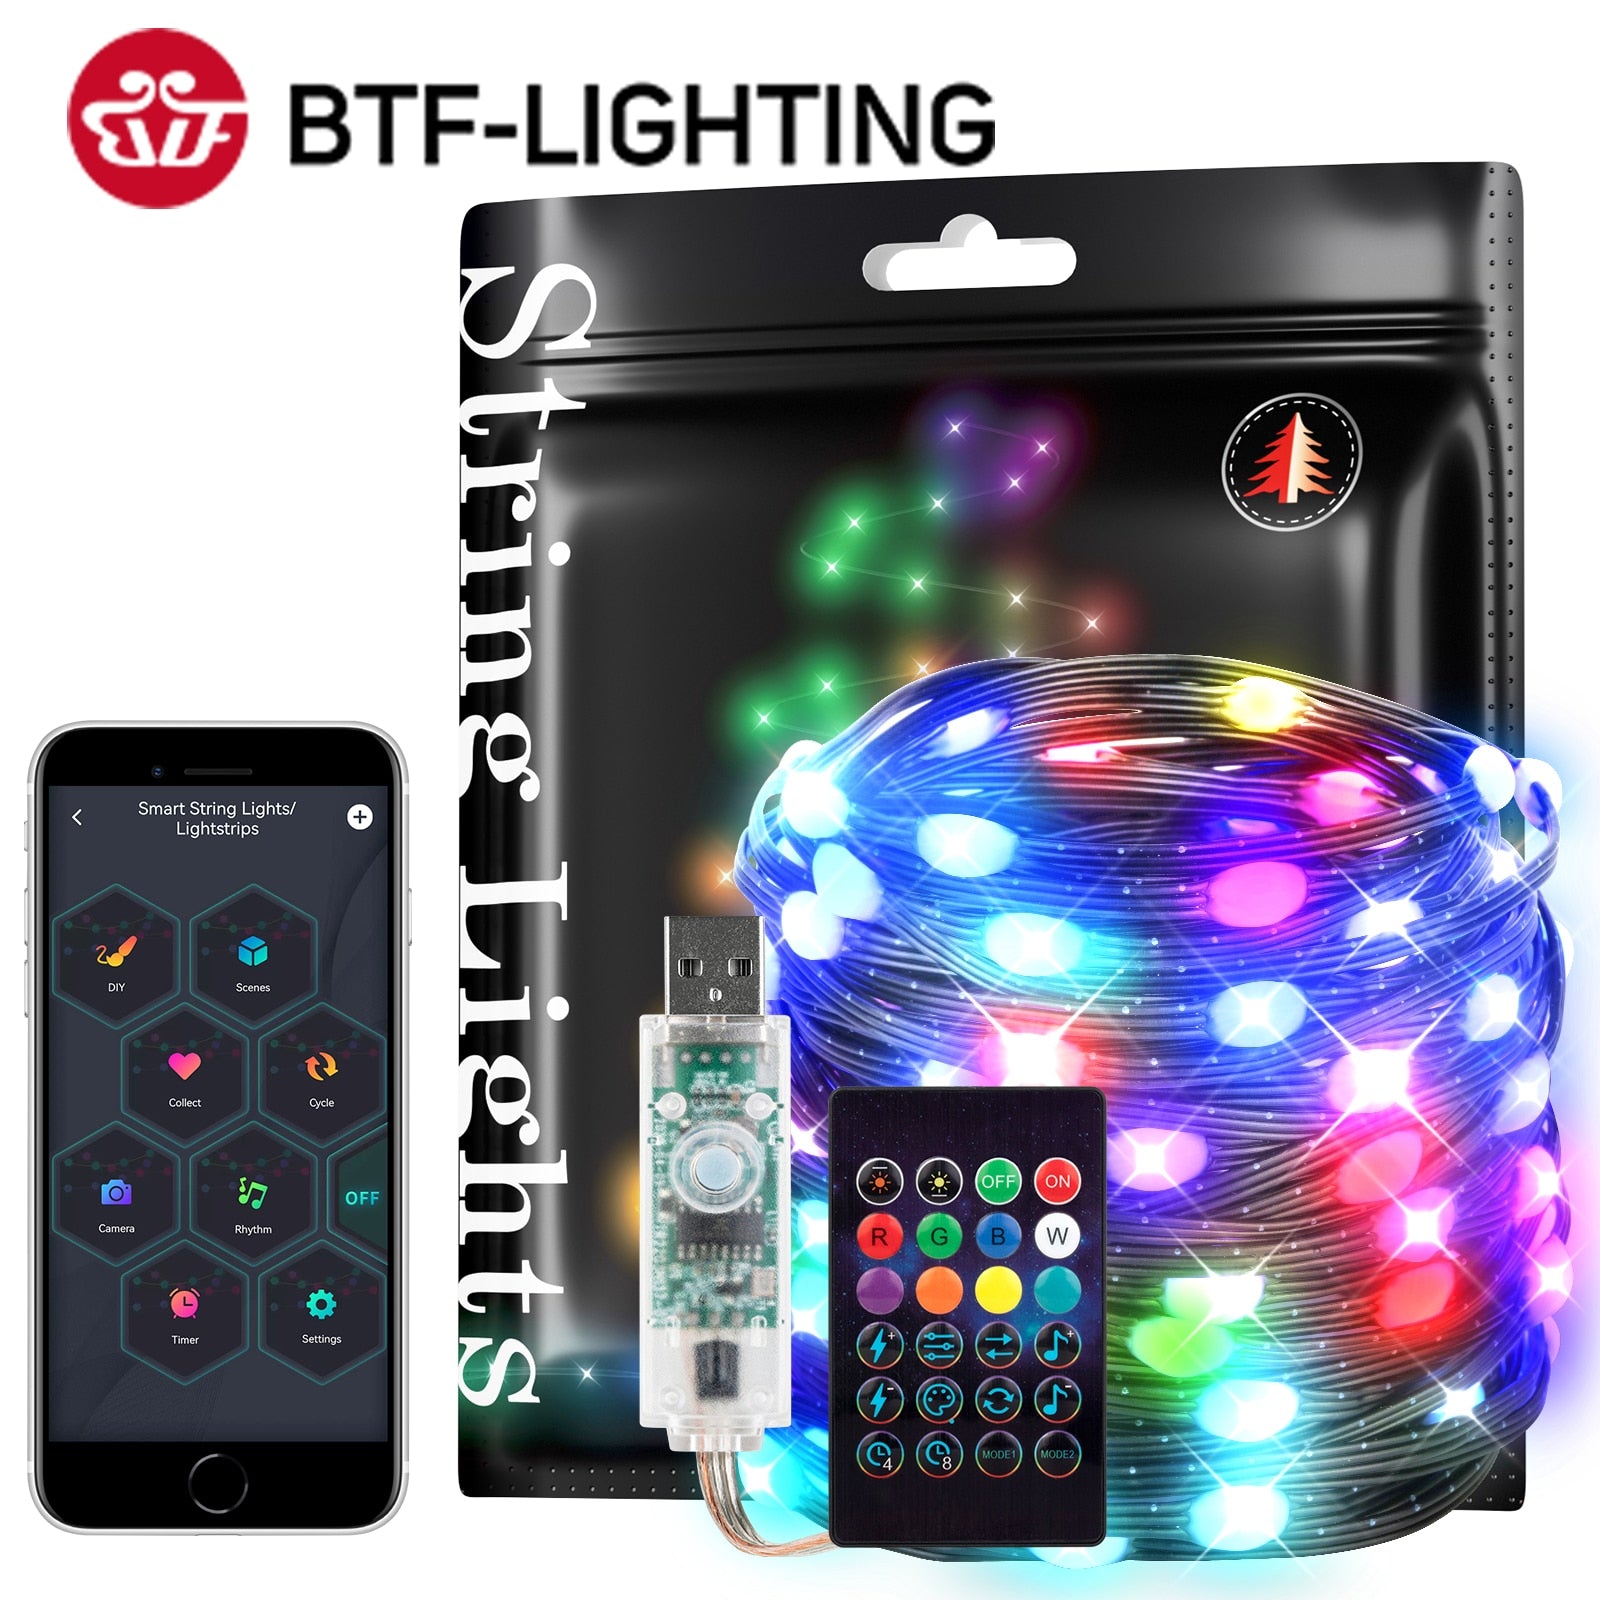 The Z1 Christmas Lights with Music